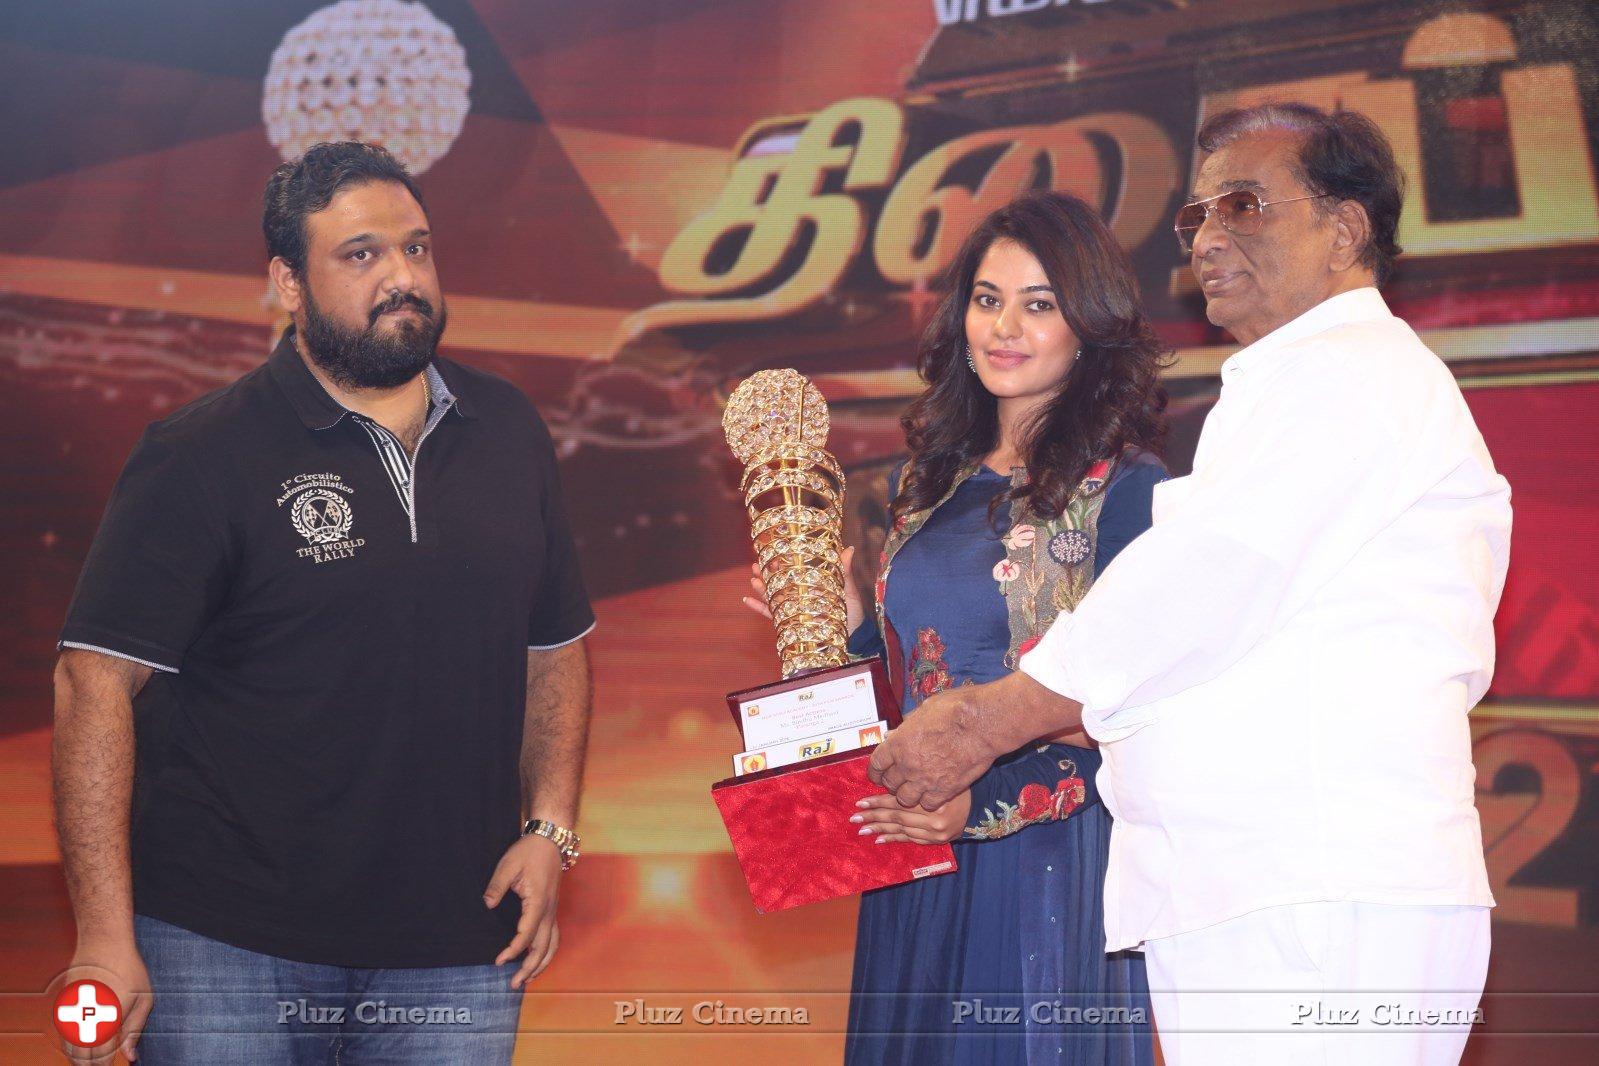 V4 Entertainers Film Awards 2016 Photos | Picture 1194535